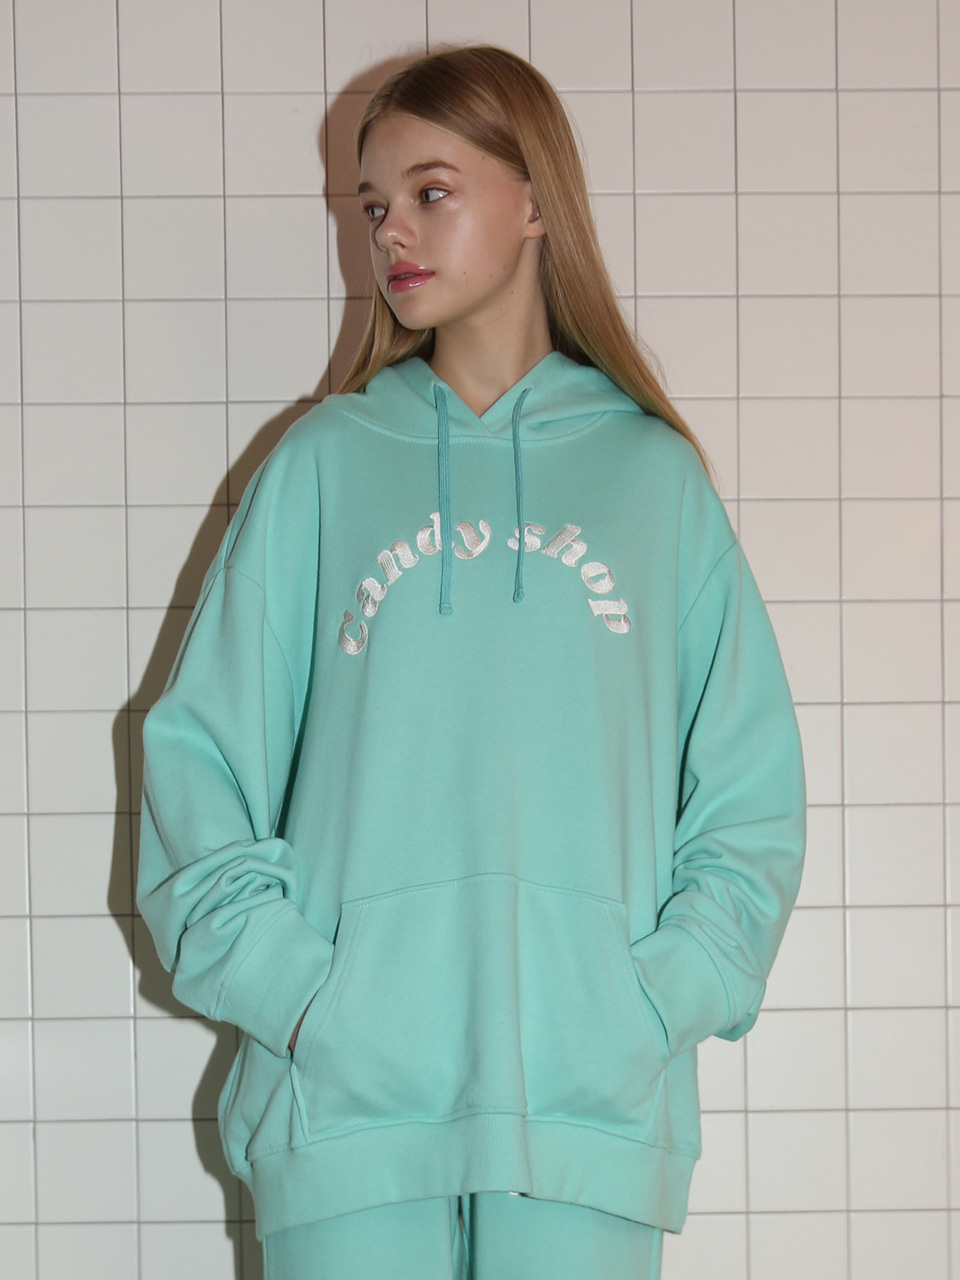 [sold out][CANDY SHOP] candy shop logo hood - MINT